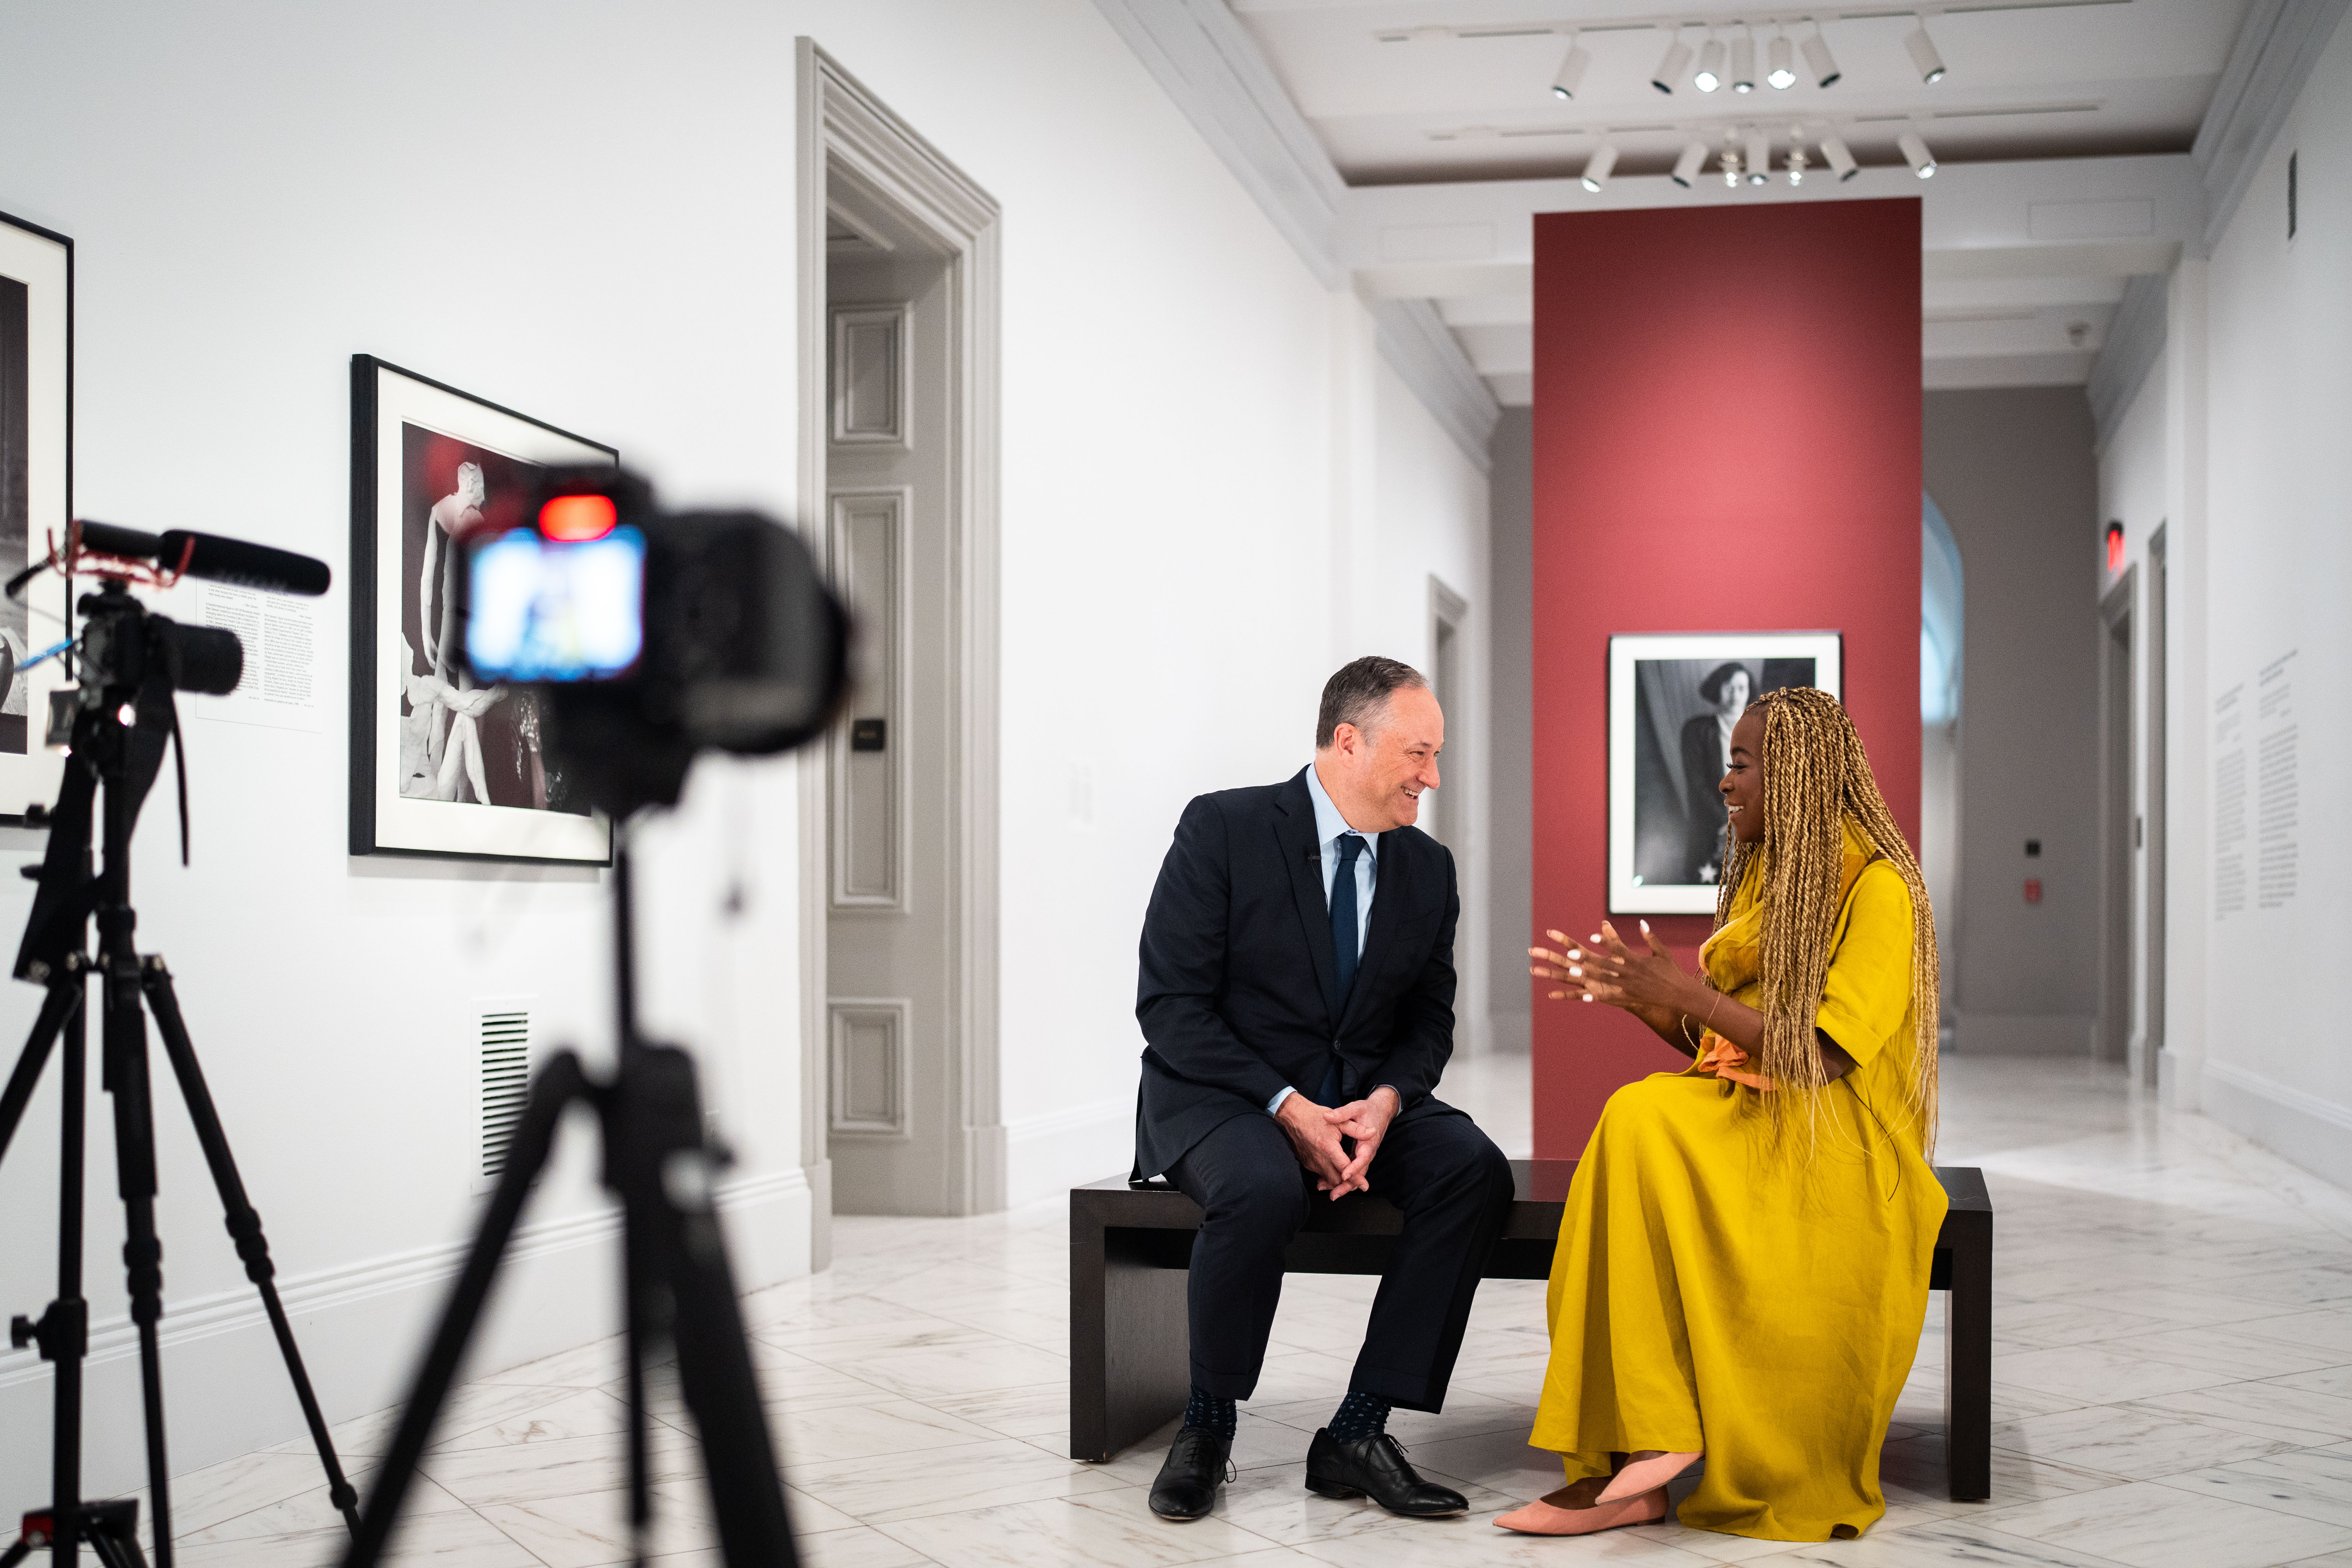 Editor-at-large Errin Haines chats with Second Gentleman Douglas Emhoff at the National Portrait Gallery